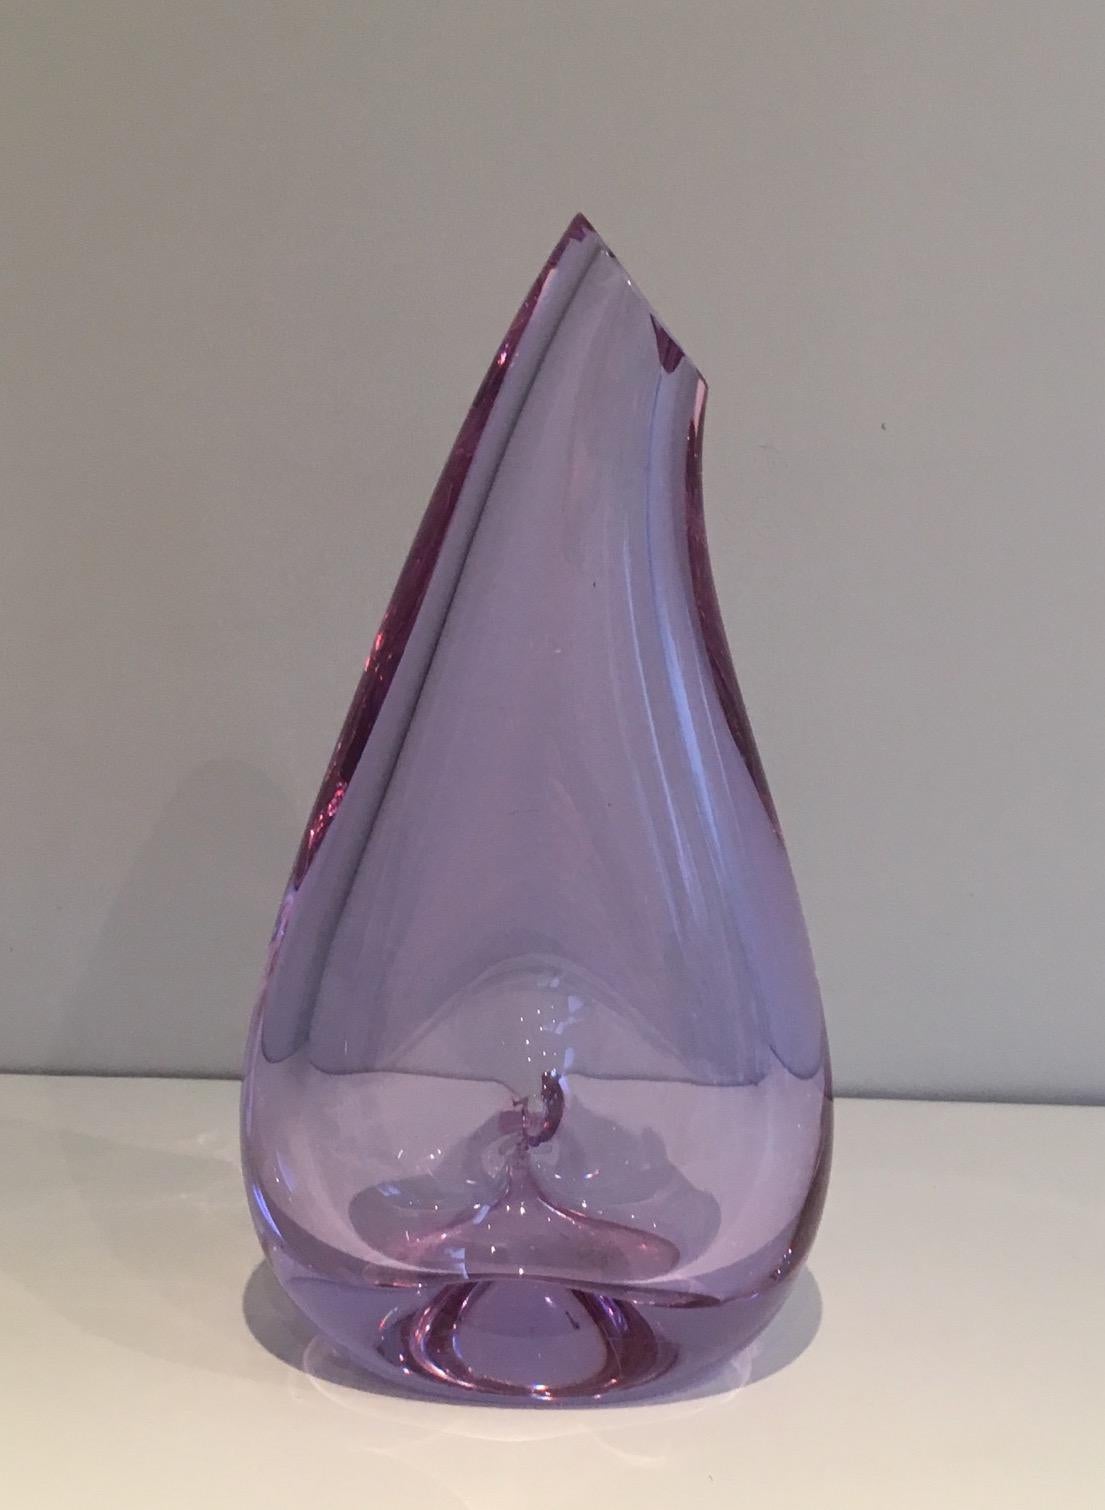 Mid-Century Modern Glass Purplish-Colored Pear-Shaped Vase. French Work, Circa 1970 For Sale